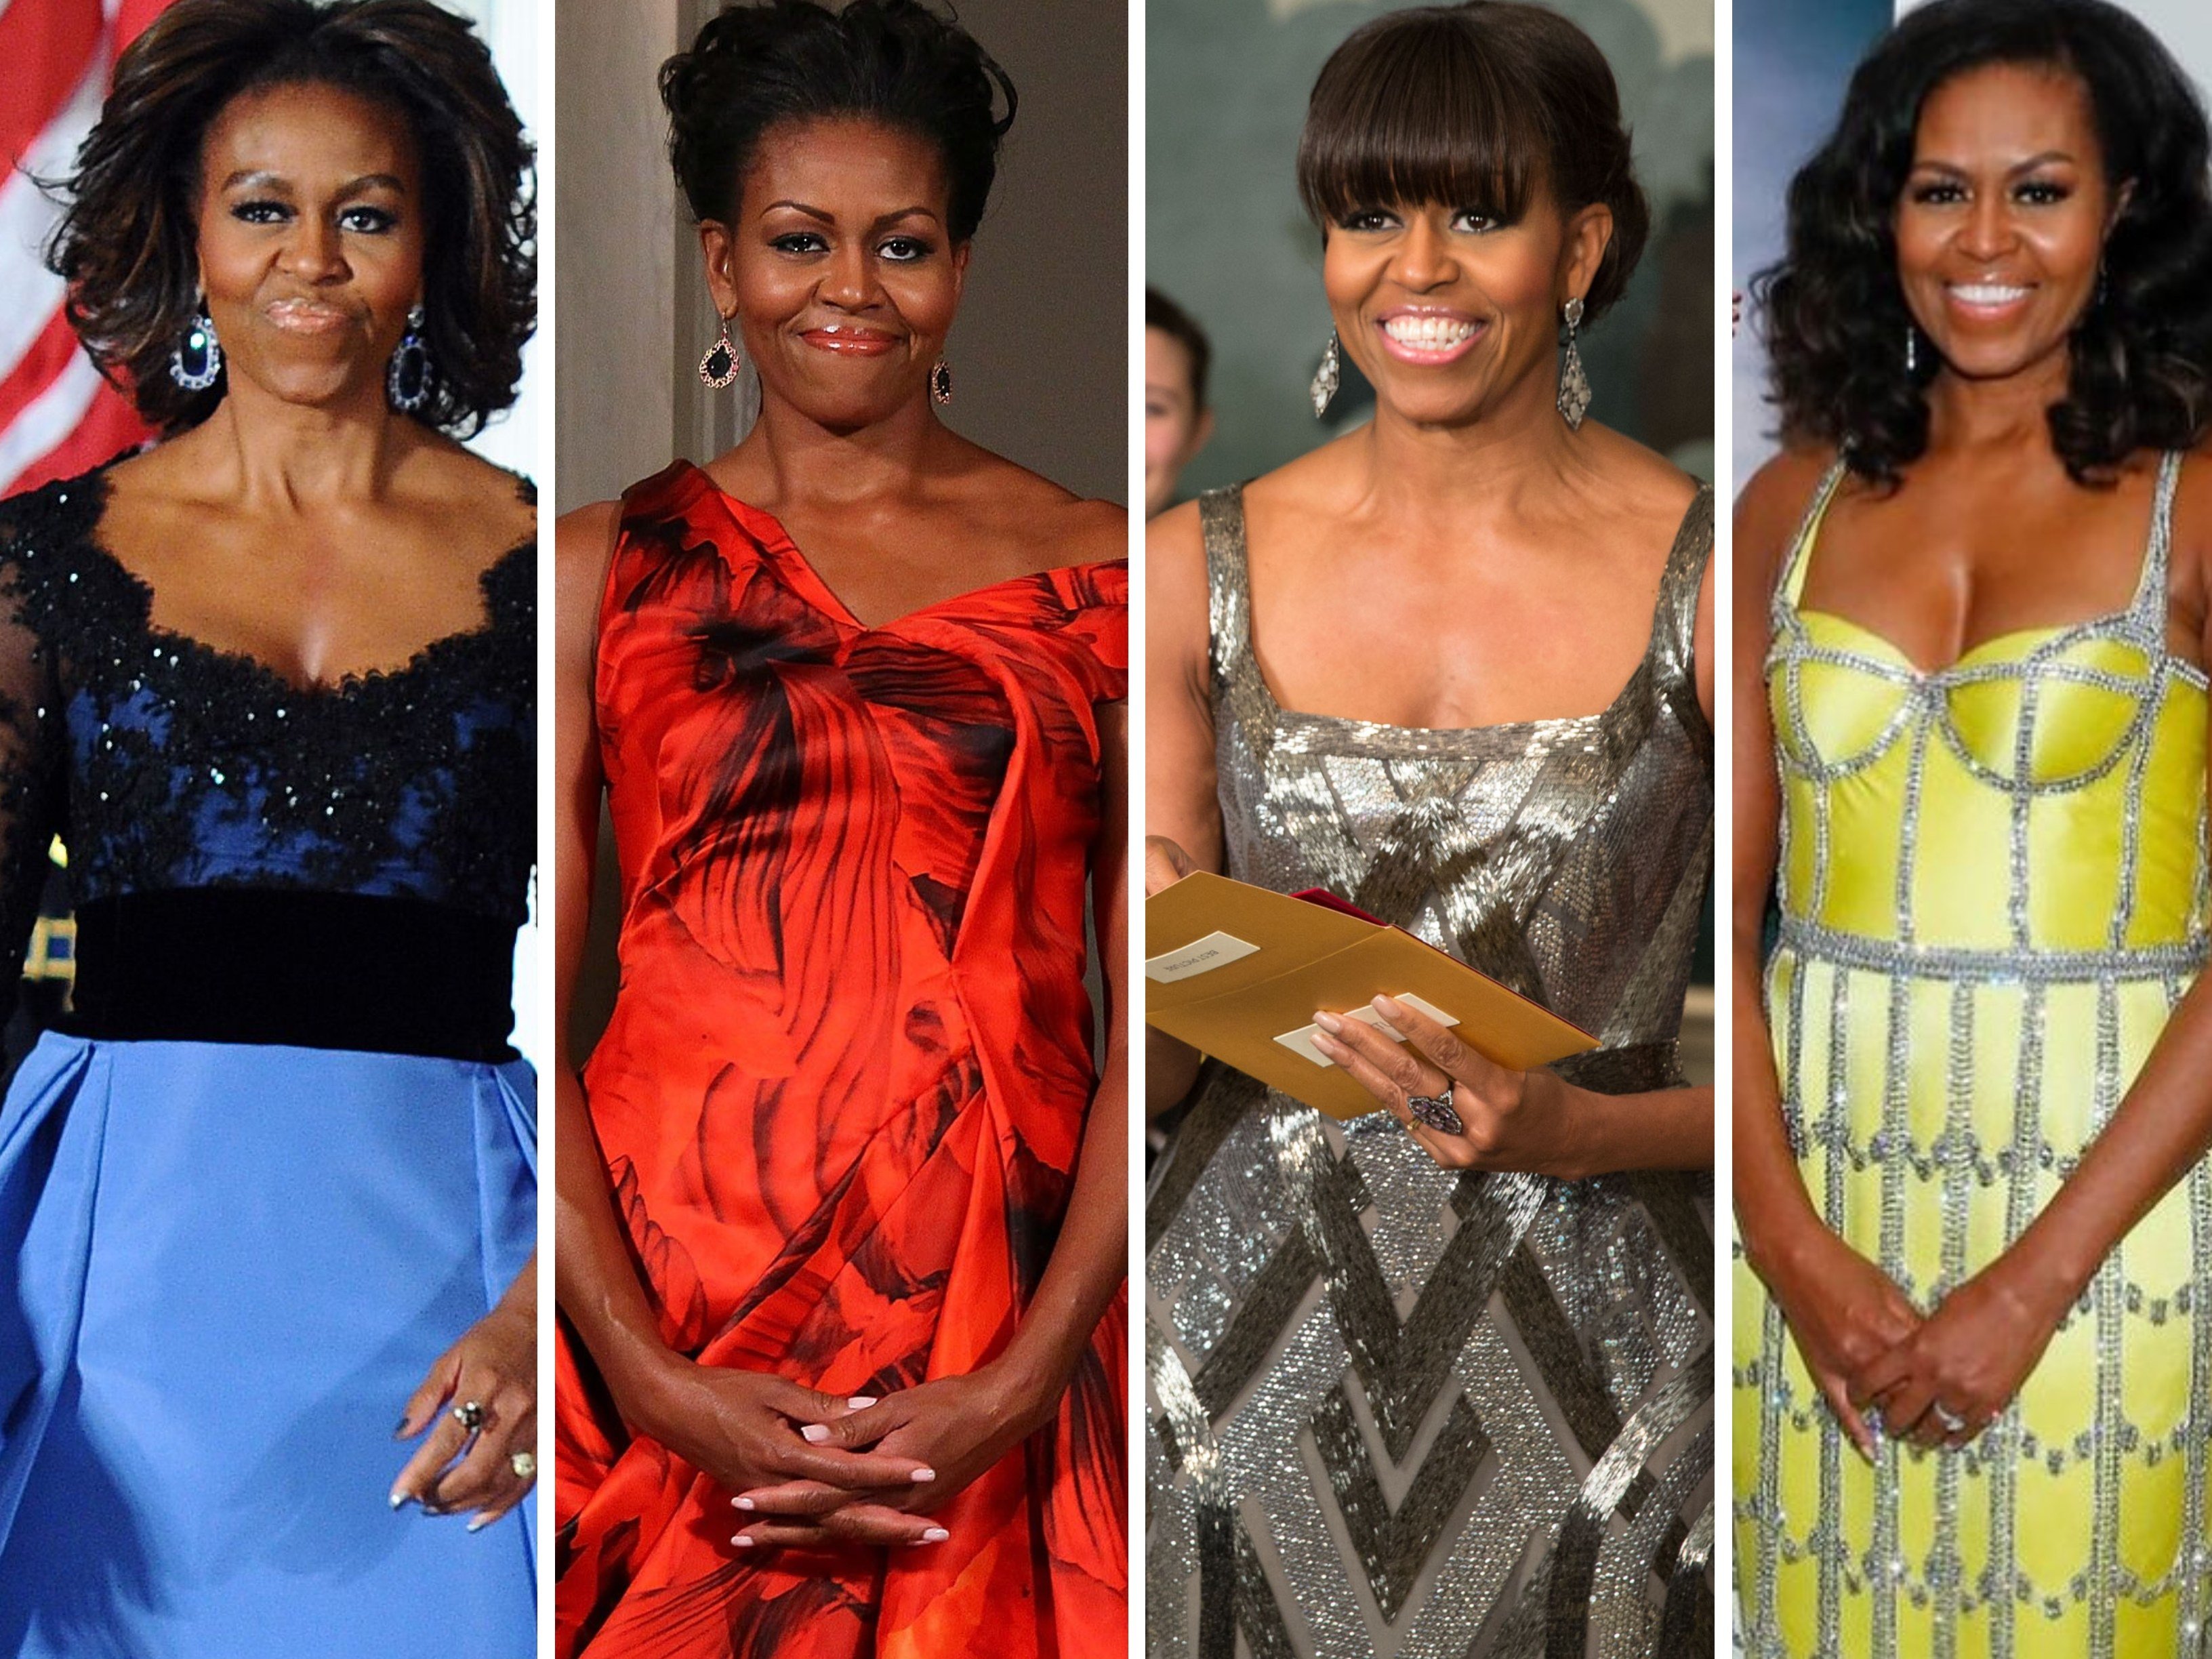 21 of Michelle Obama’s top style triumphs, from her time as first lady of the US and after. Photos: AFP, EPA, Getty Images, @michelleobama/Instagram